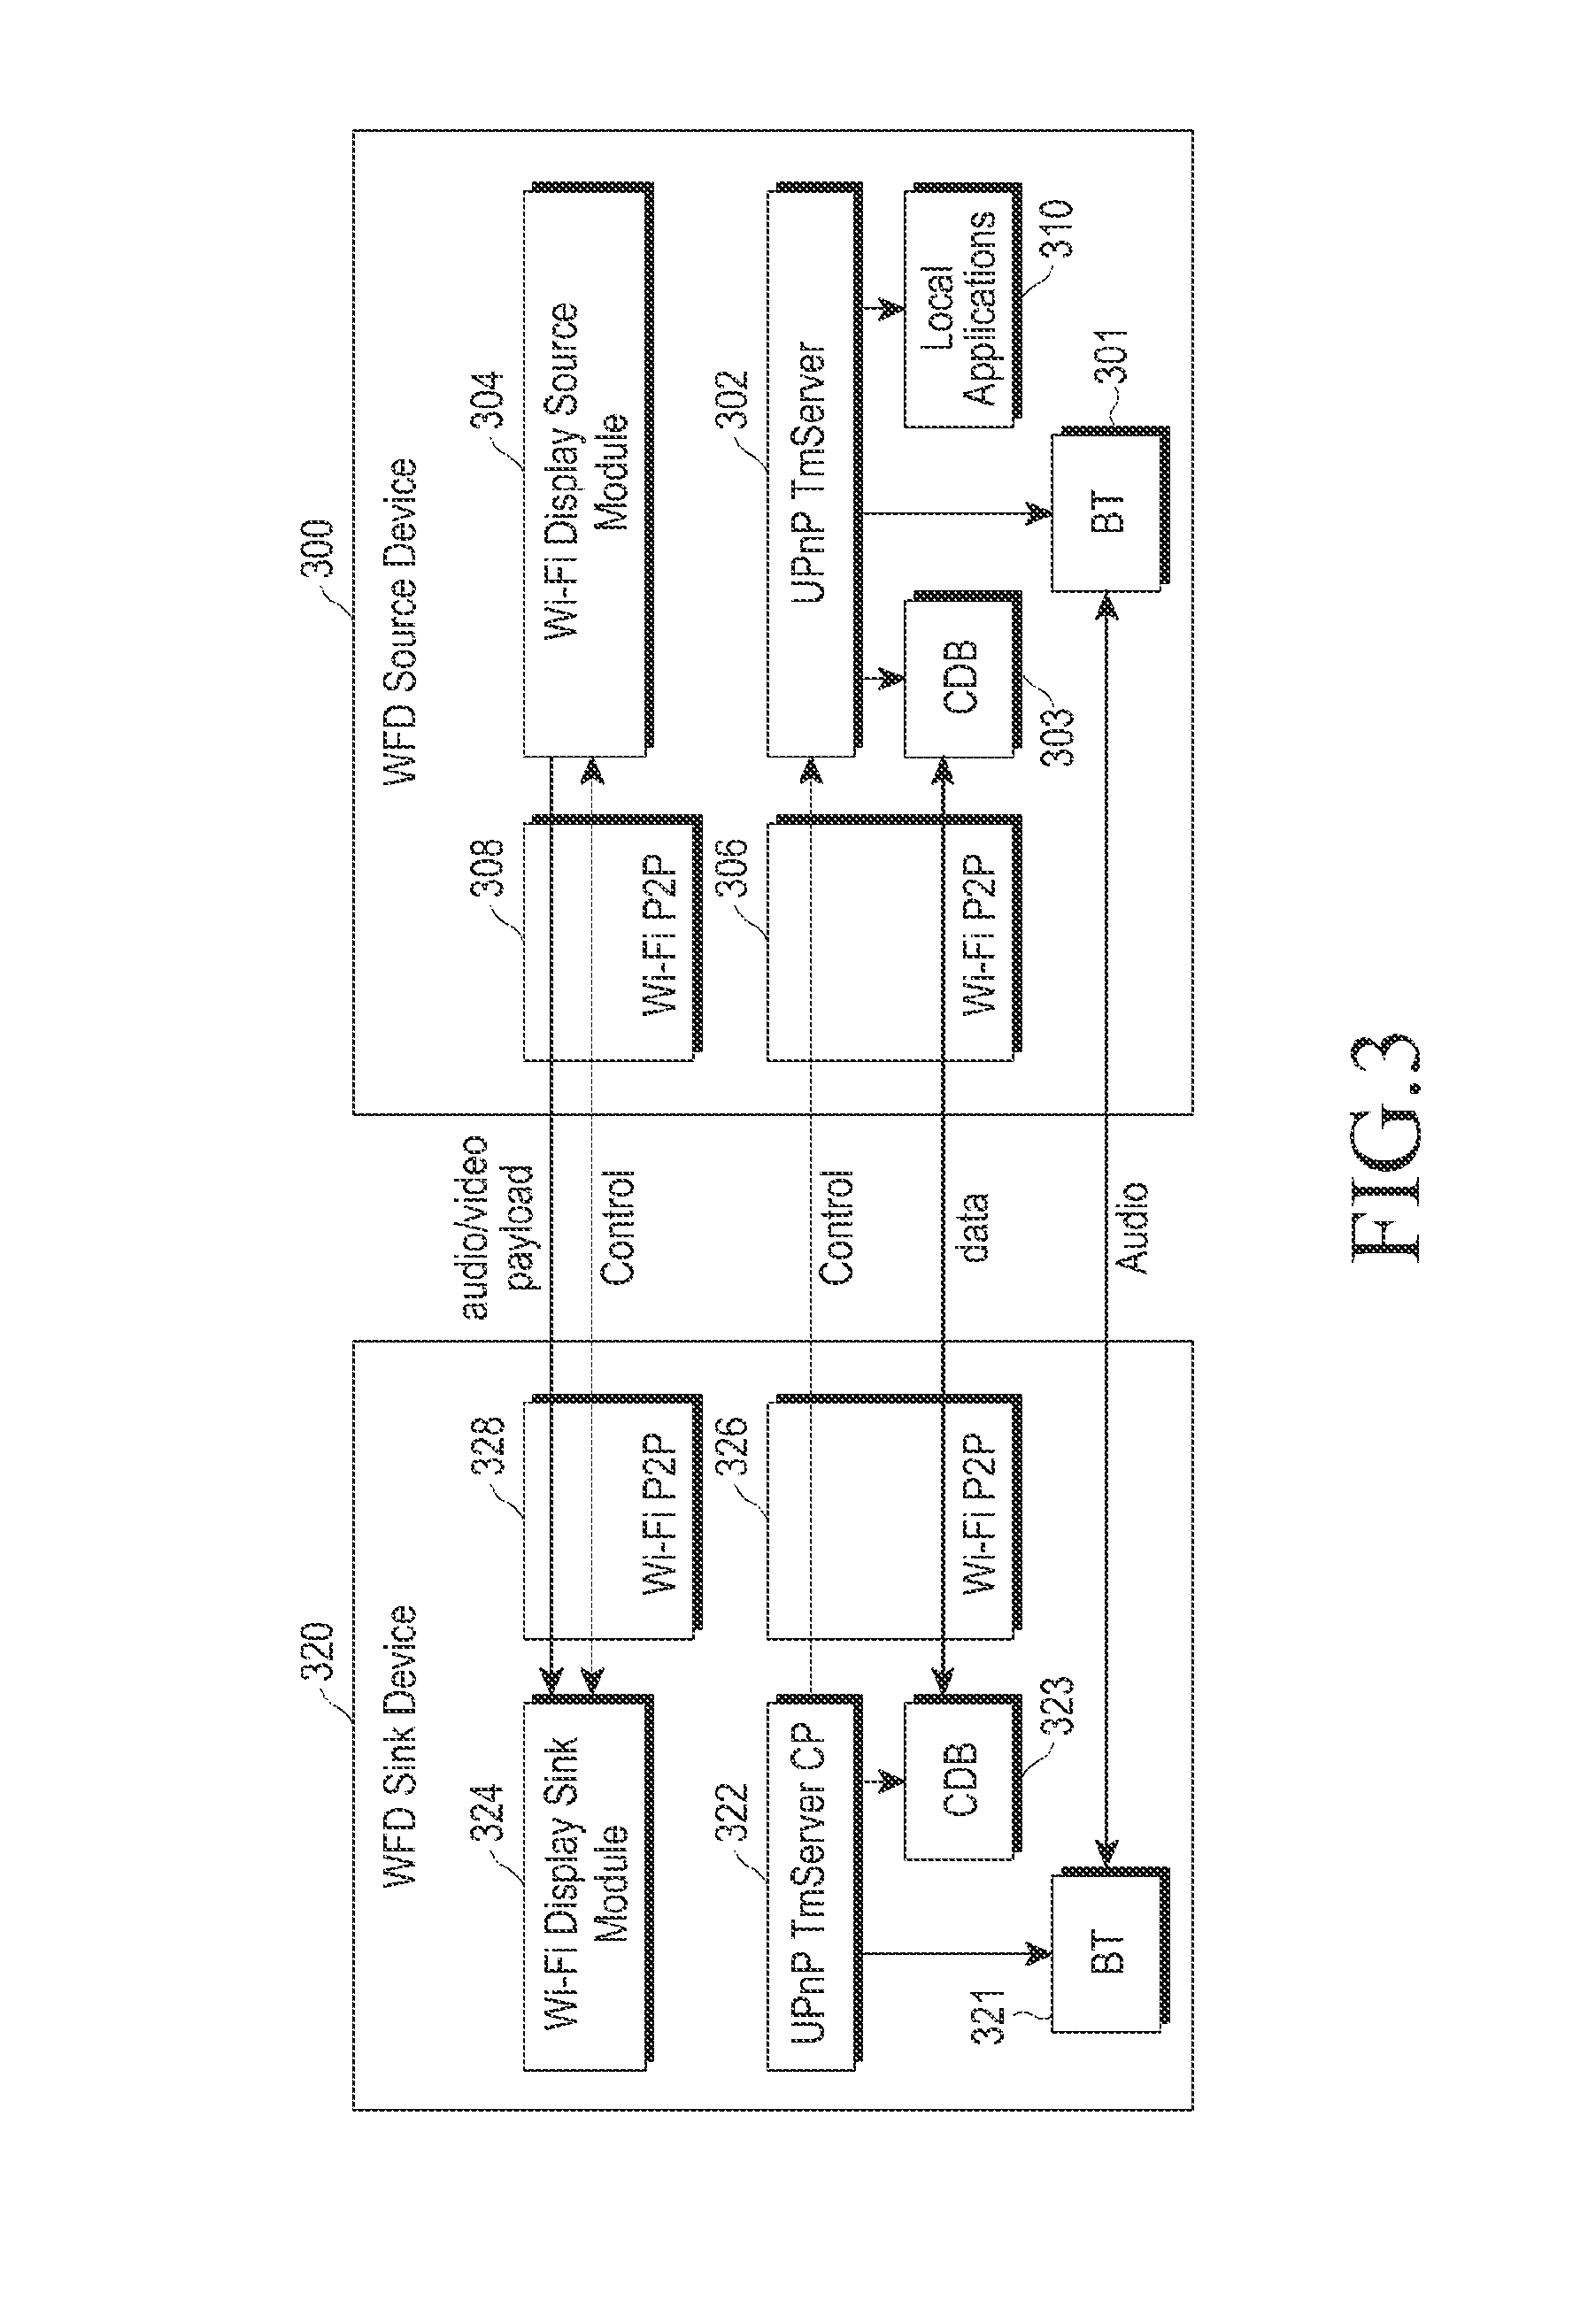 Method and apparatus for connection between client and server